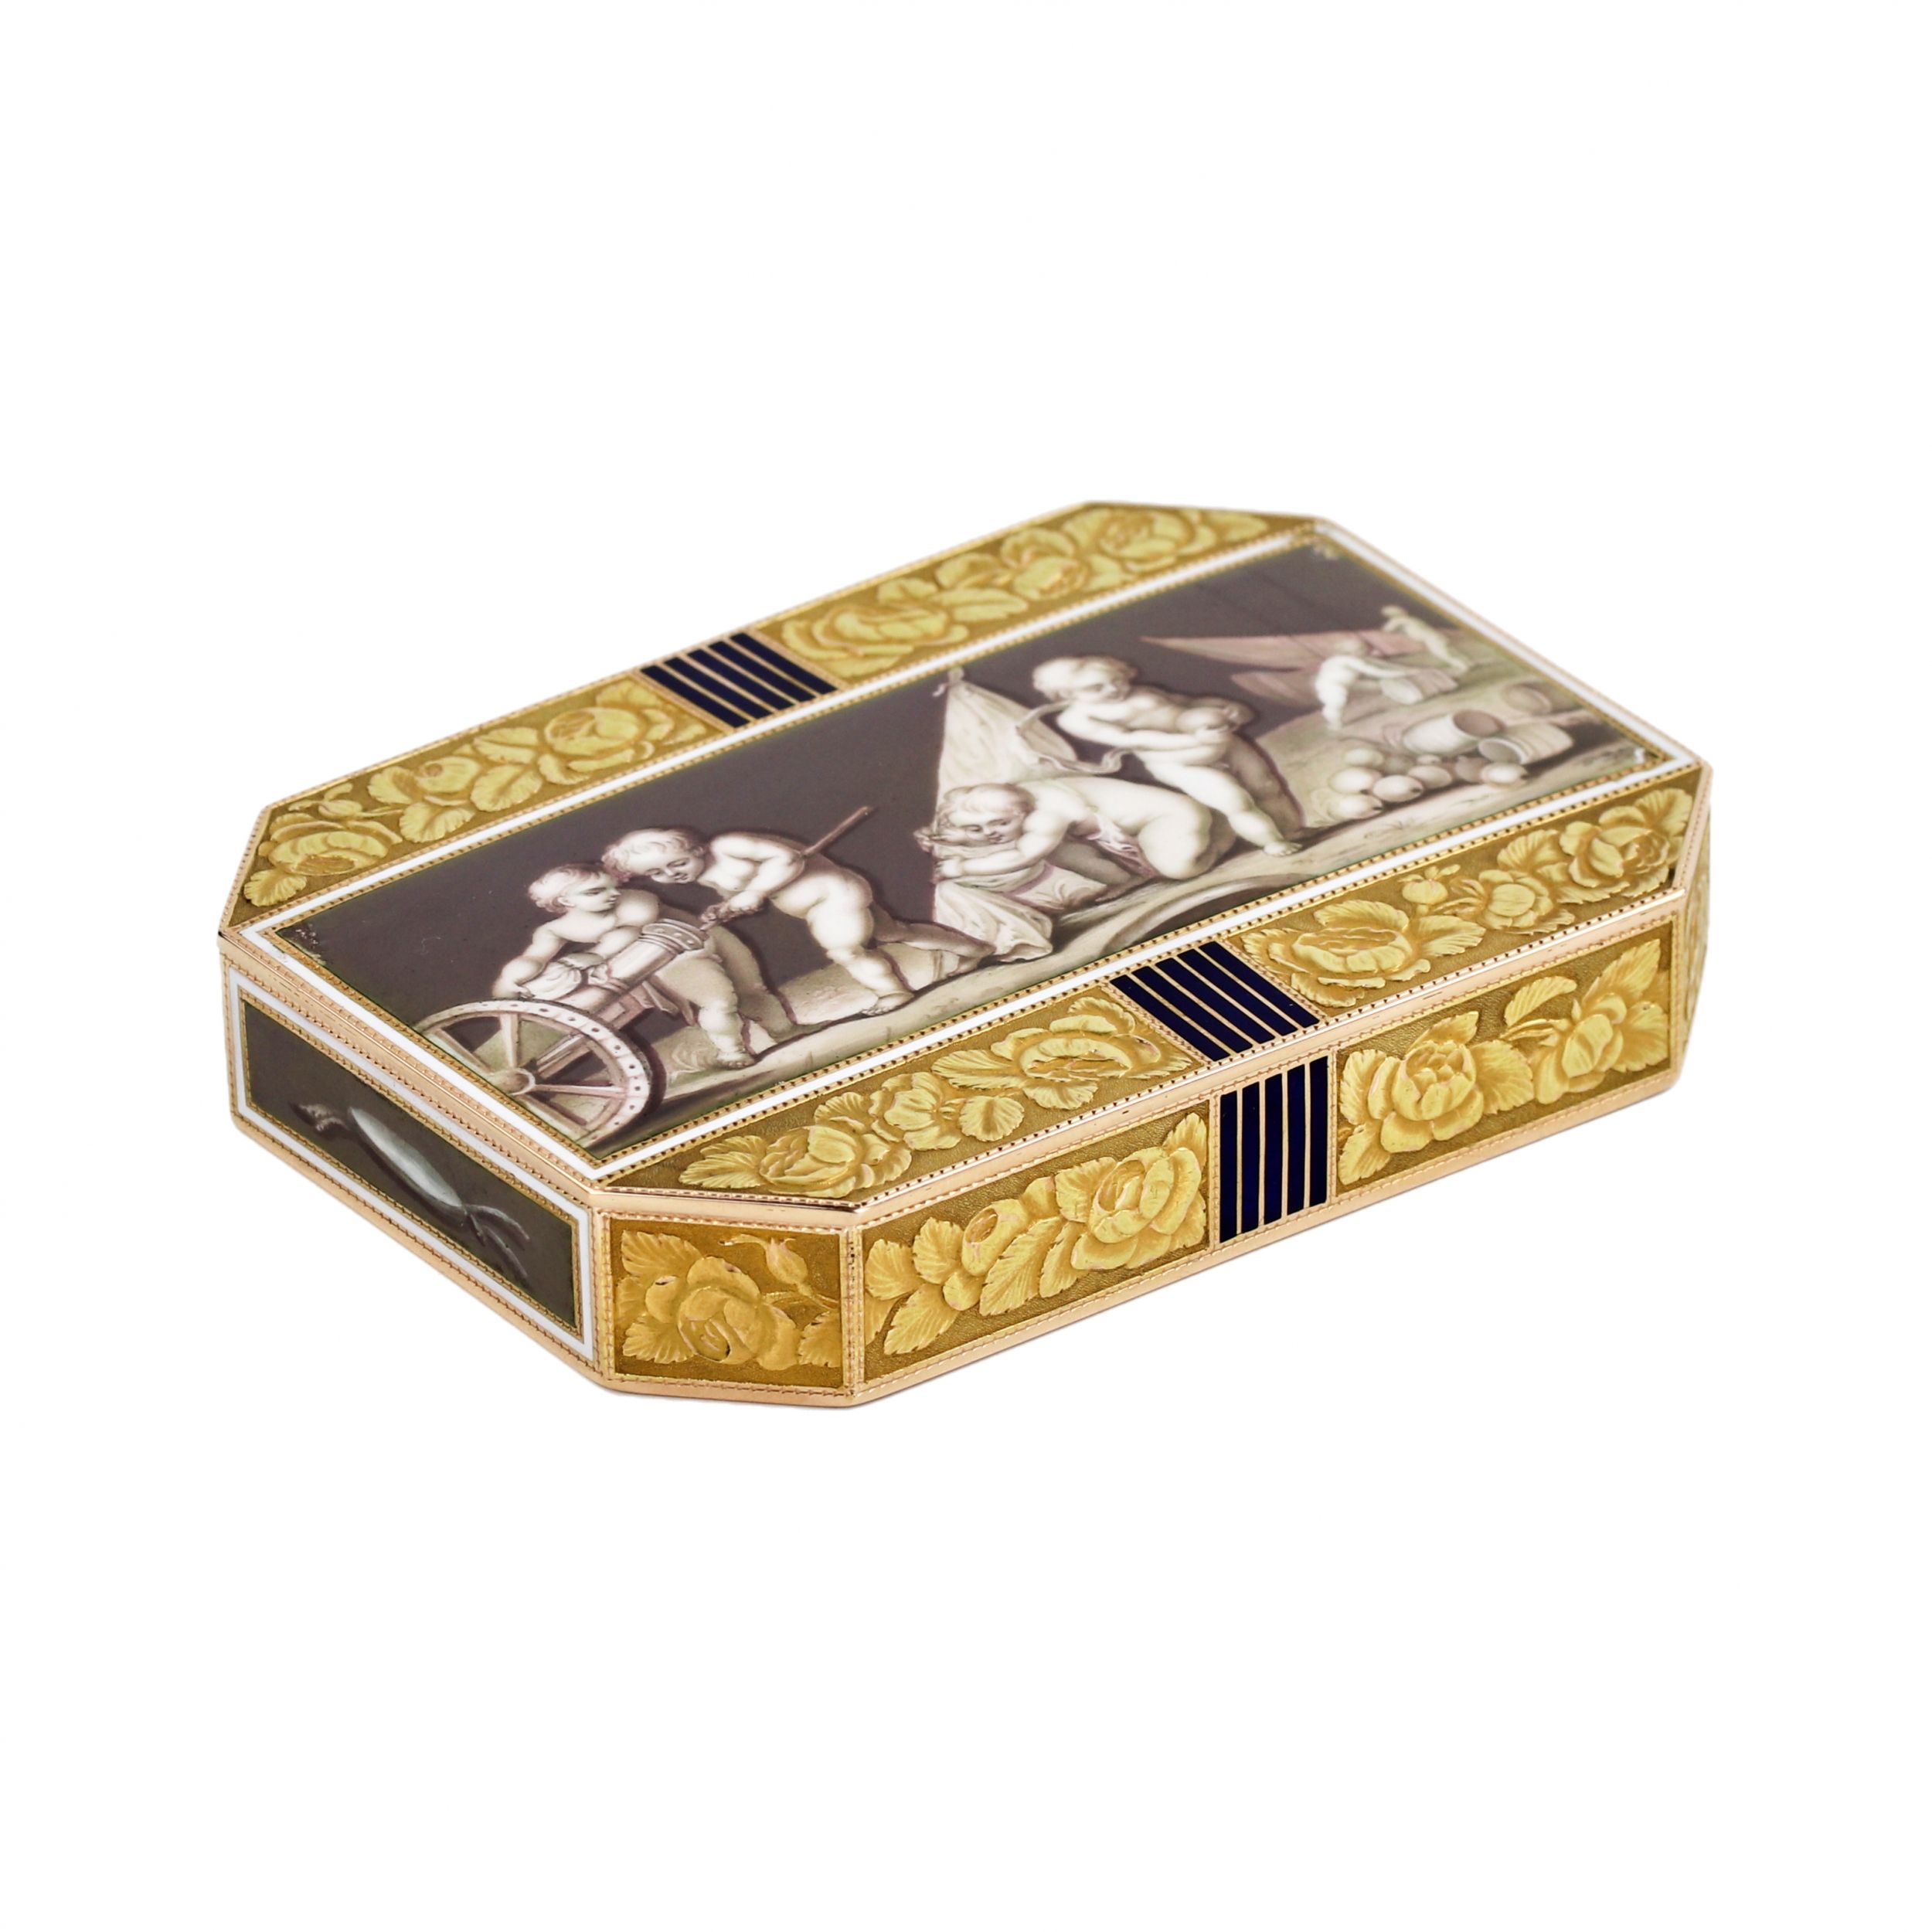 Golden-French-snuffbox-with-enamel-grisaille-Empire-period-